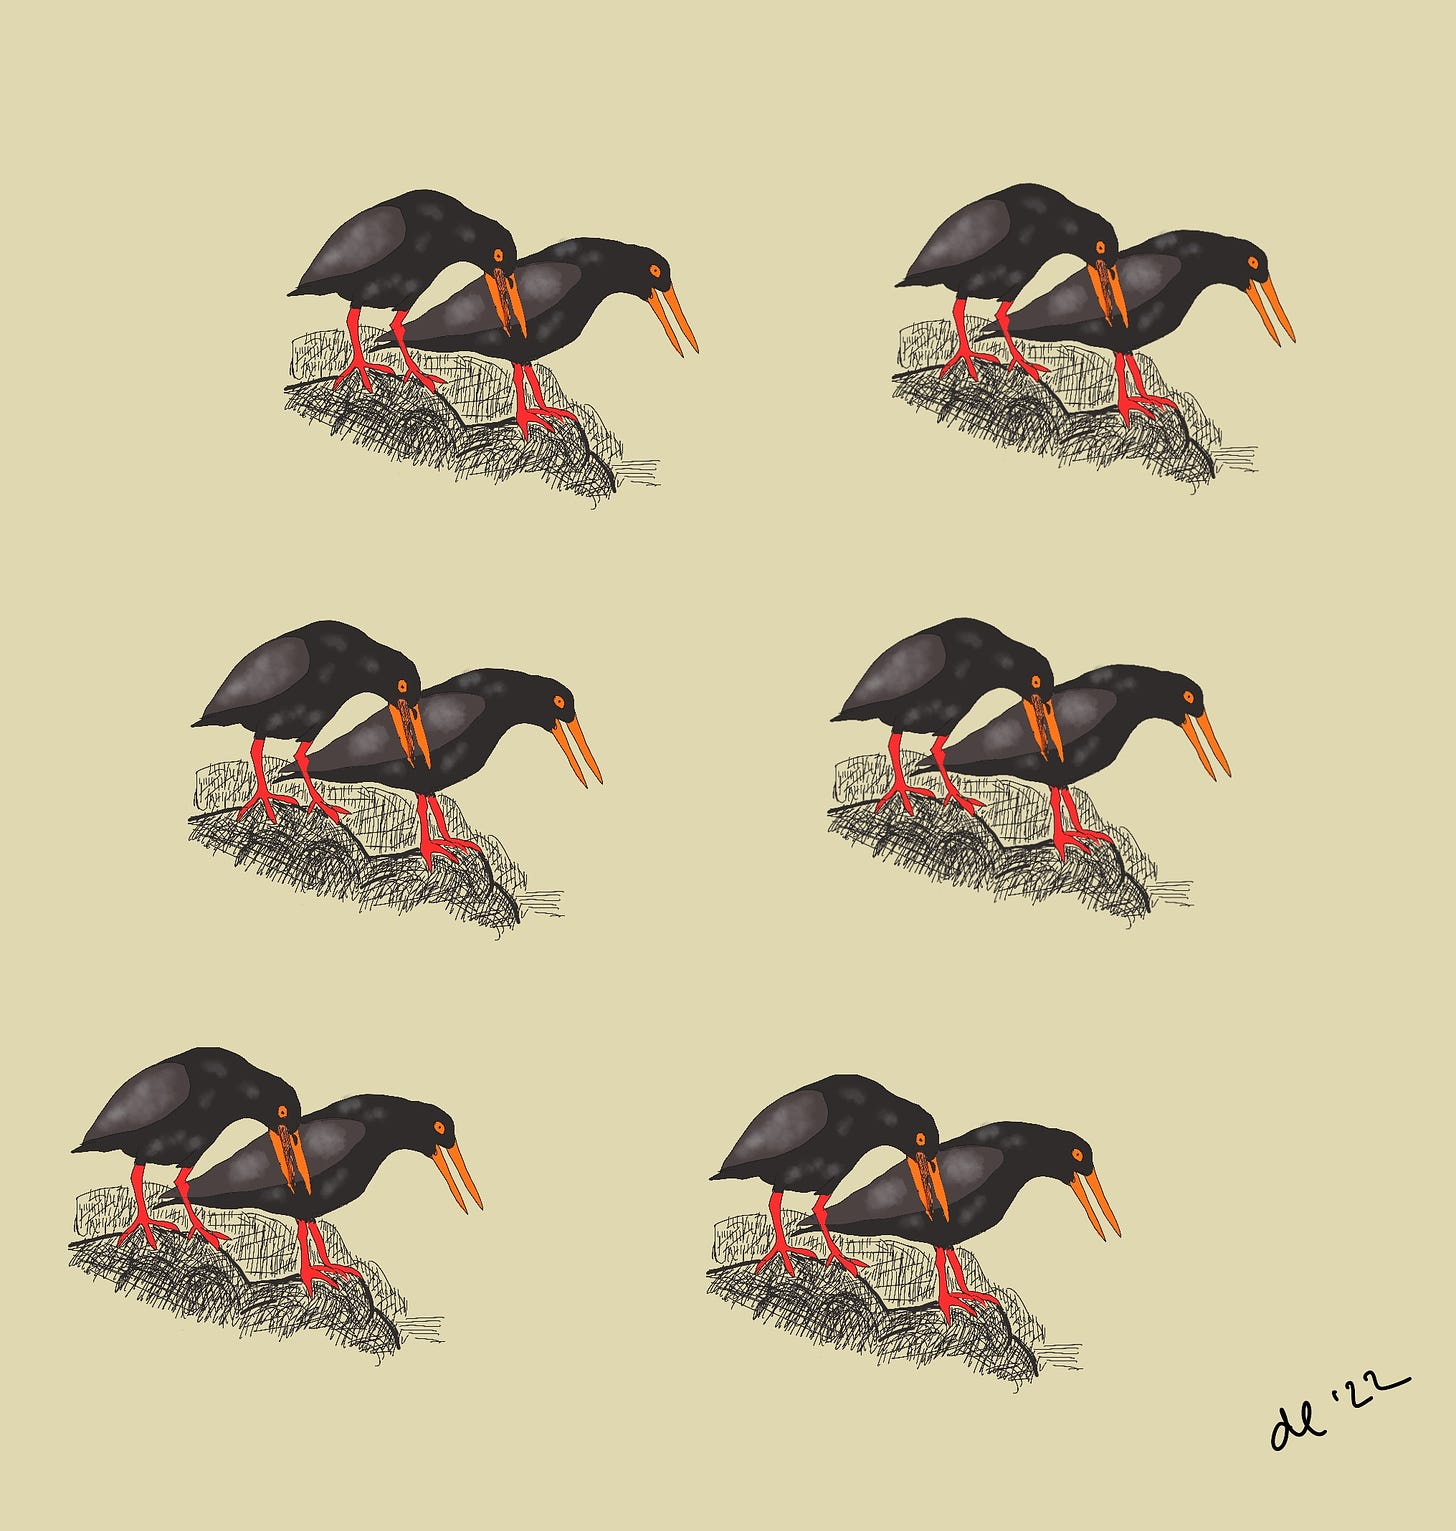 an illustration by the author of 6 identical pairs of oystercatchers standing on a rock